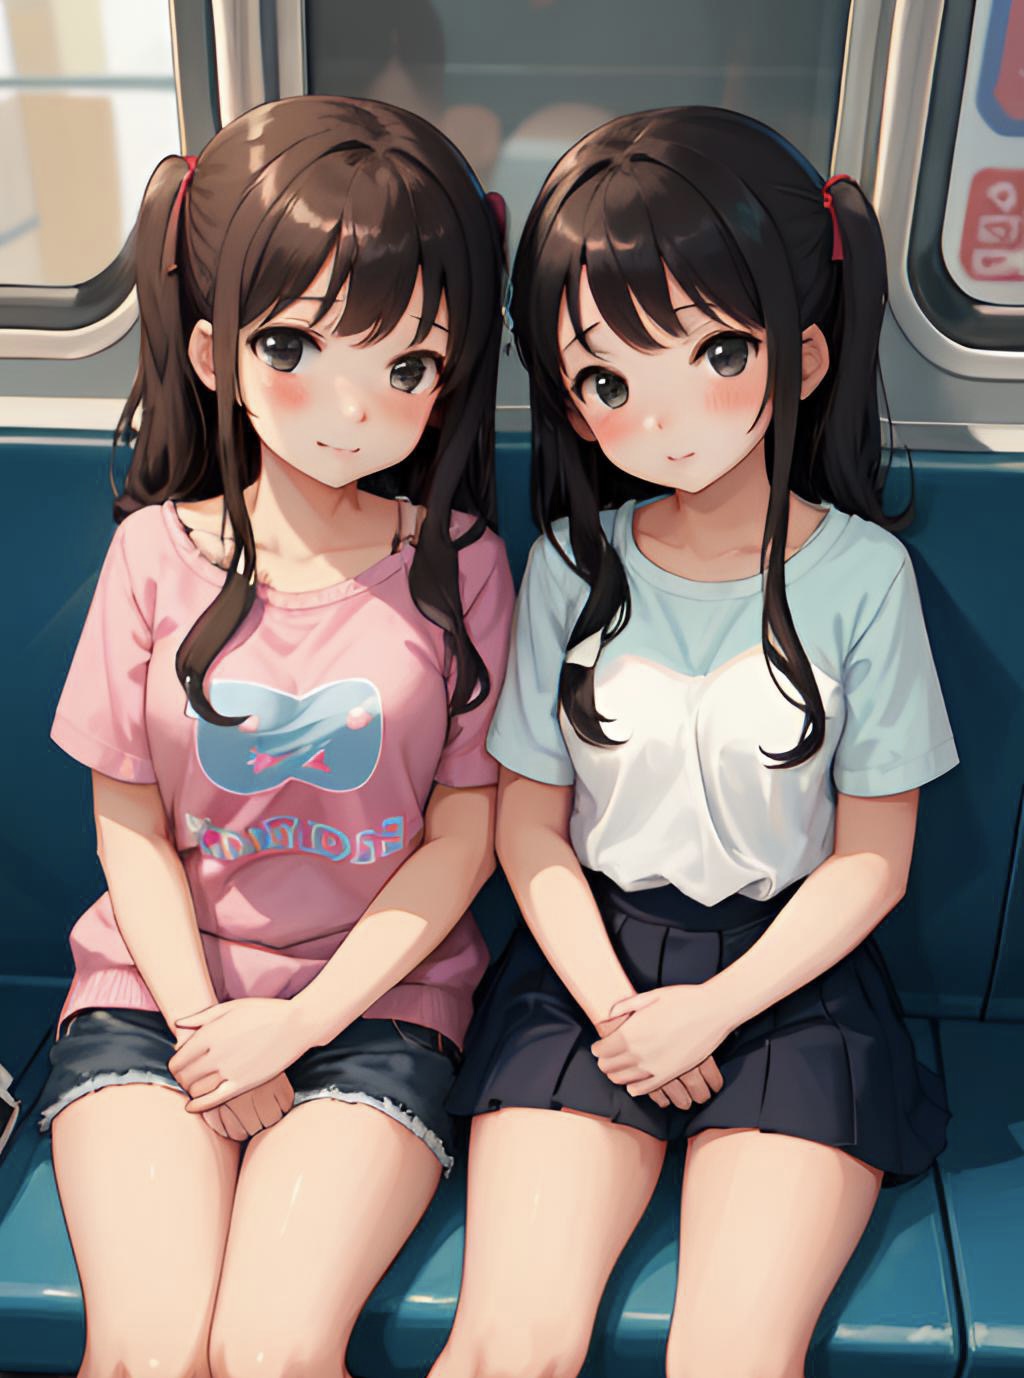 Anime 1024x1378 AI art anime anime girls original characters long hair twintails brunette two women twins artwork digital art sitting looking at viewer smiling blushing children portrait display